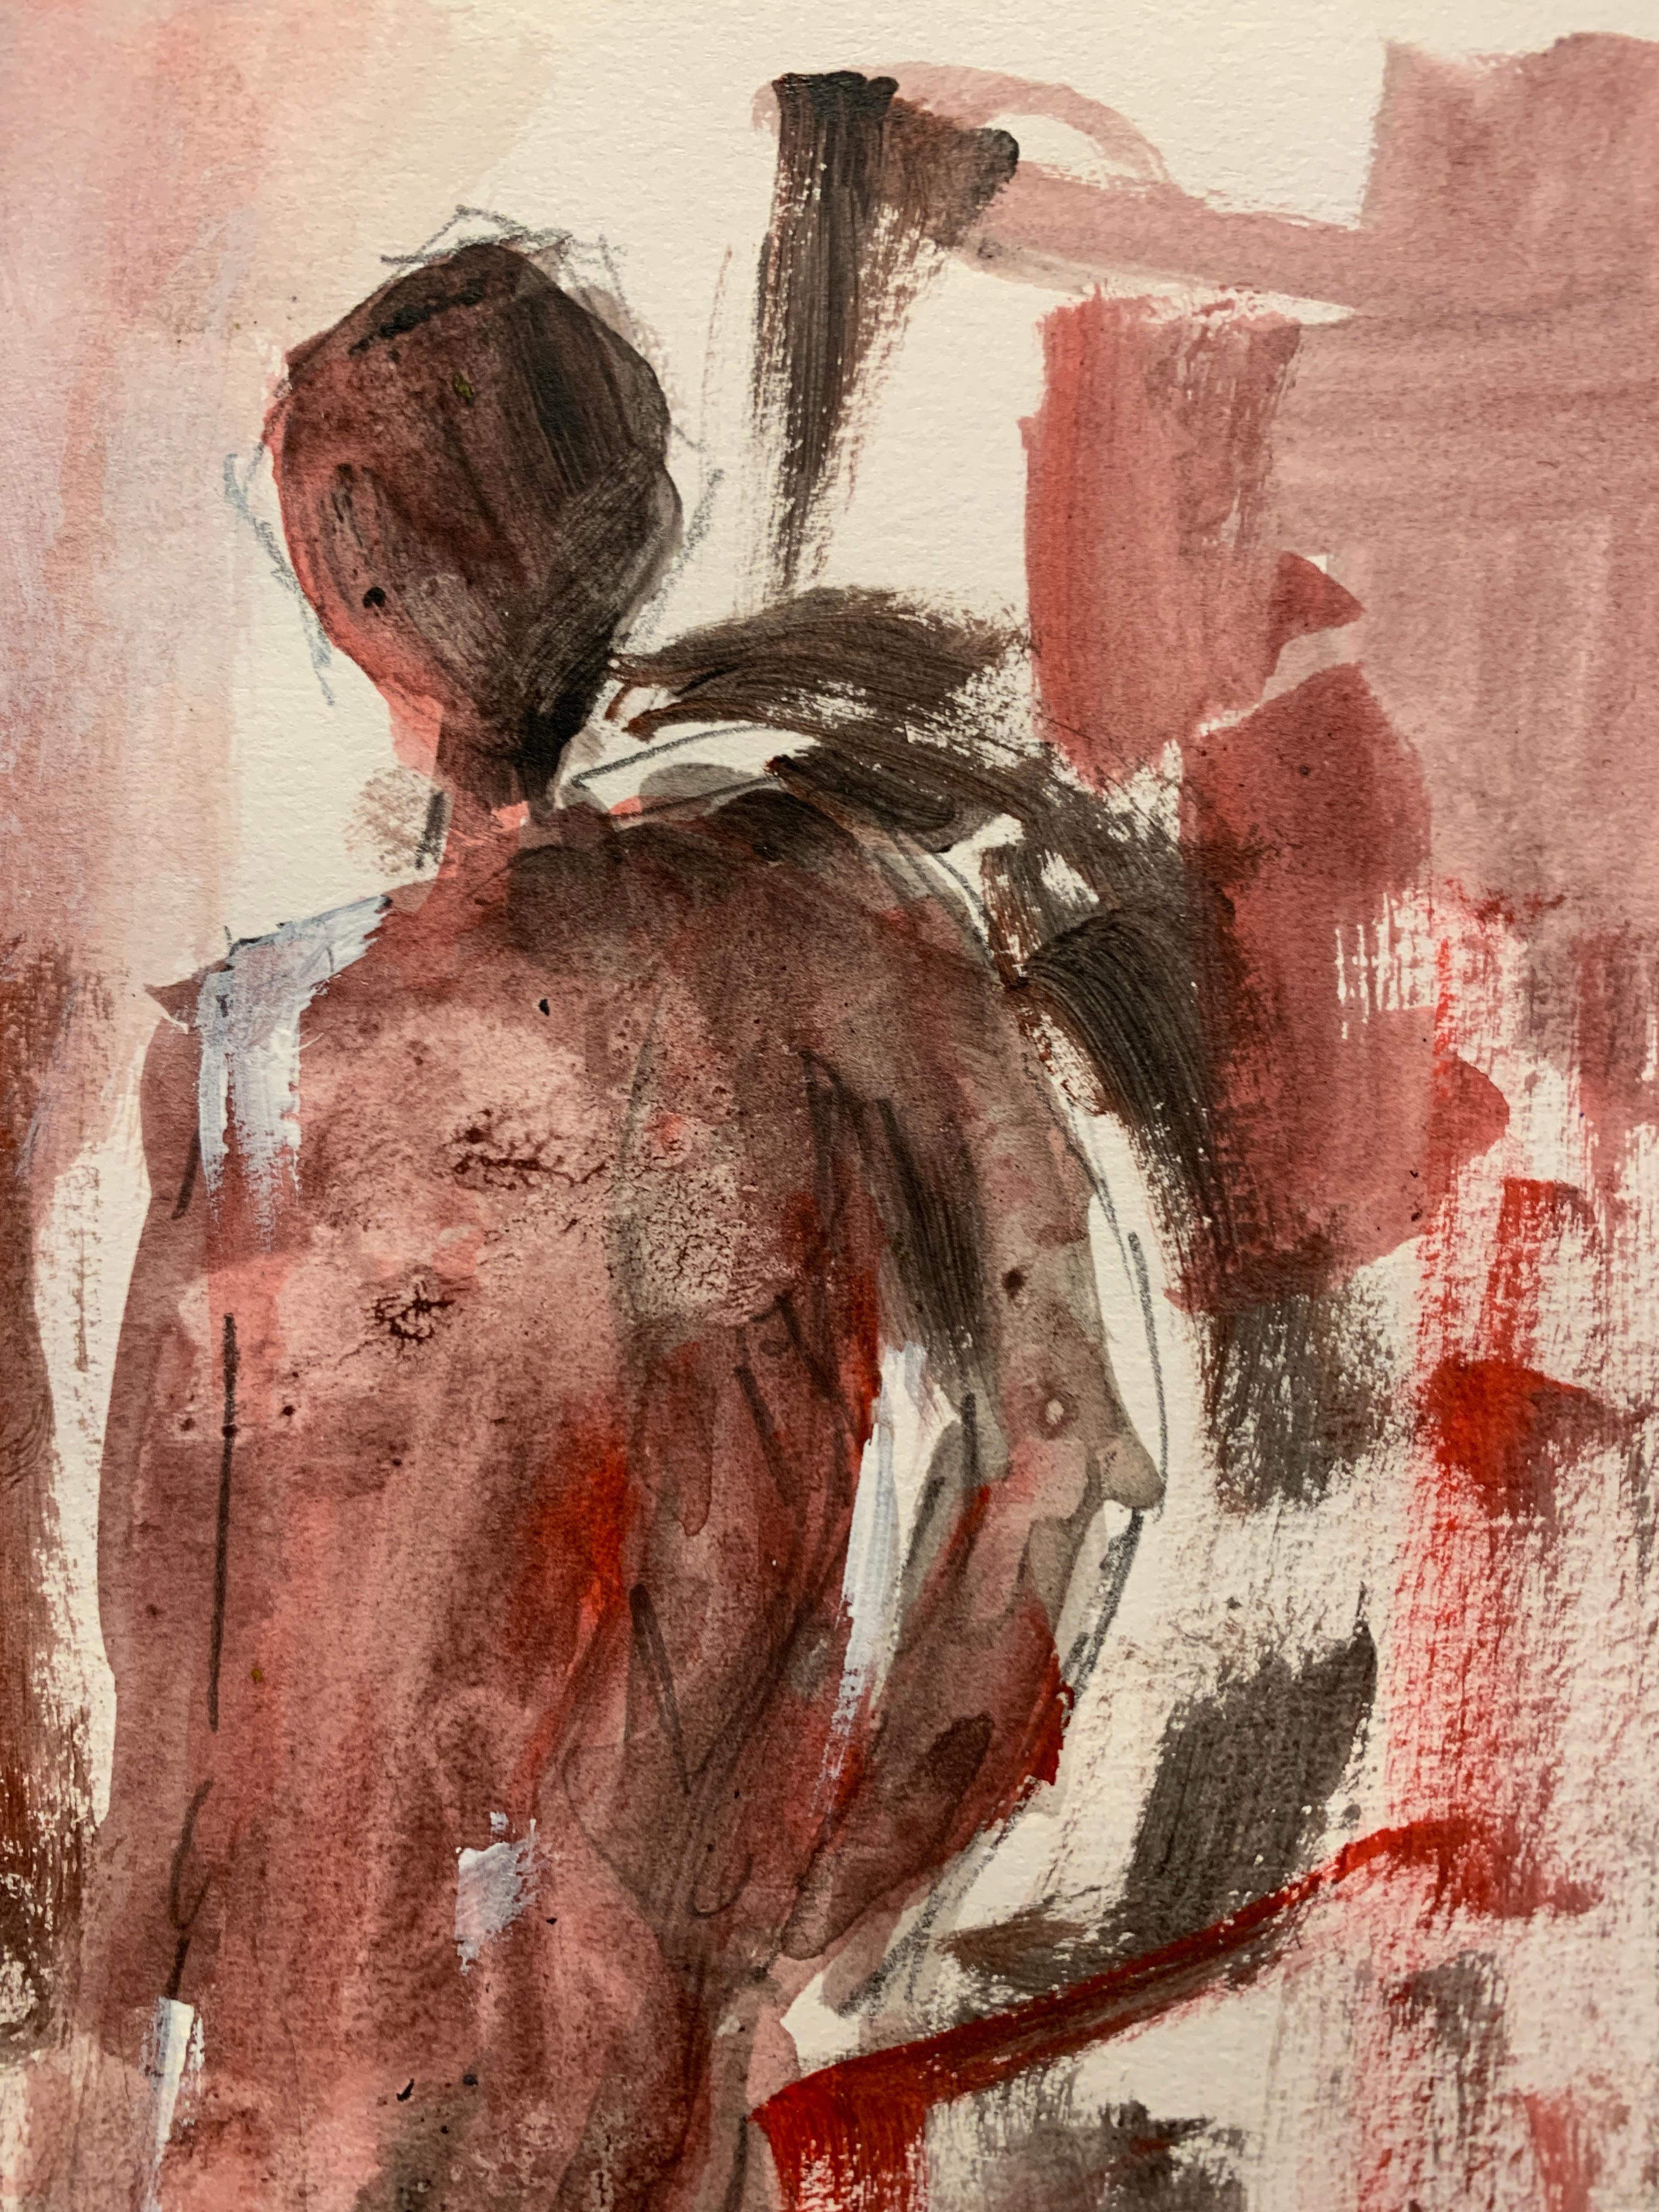 English abstract 20th century oil sketch of a figure in Red, Black and White - Painting by Bertha Long